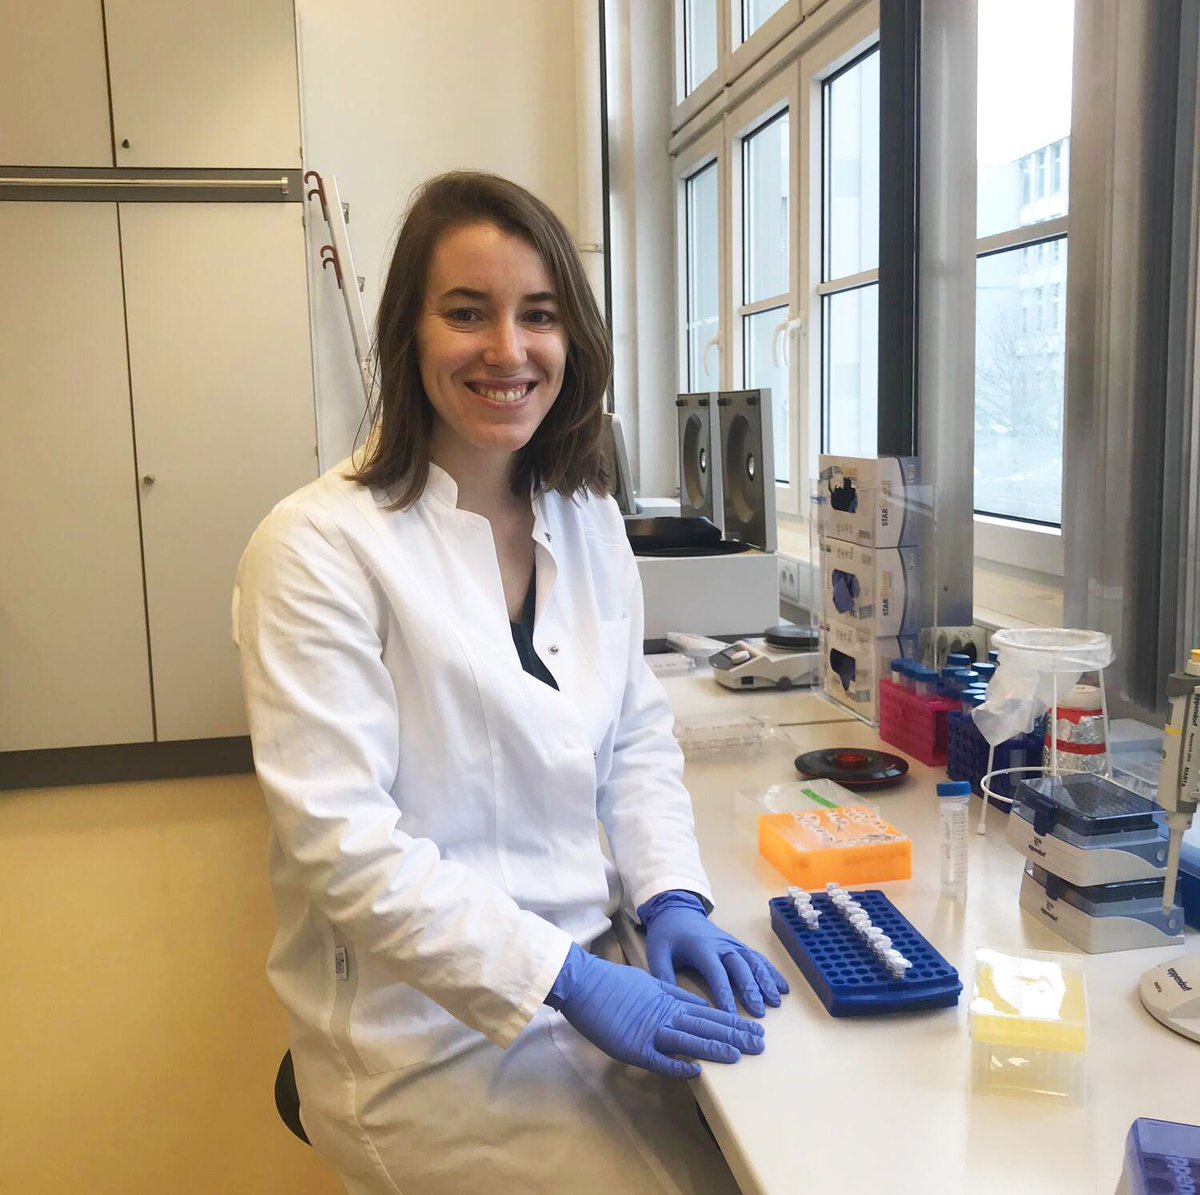 The discoveries that PhD student Megan Michel & colleagues make about diseases of the past through their analysis of ancient DNA—from the Black Death to tooth decay—may well shape humanity’s ability to deal with the pandemics of the future. buff.ly/3wjf7Og @HarvardSoHP